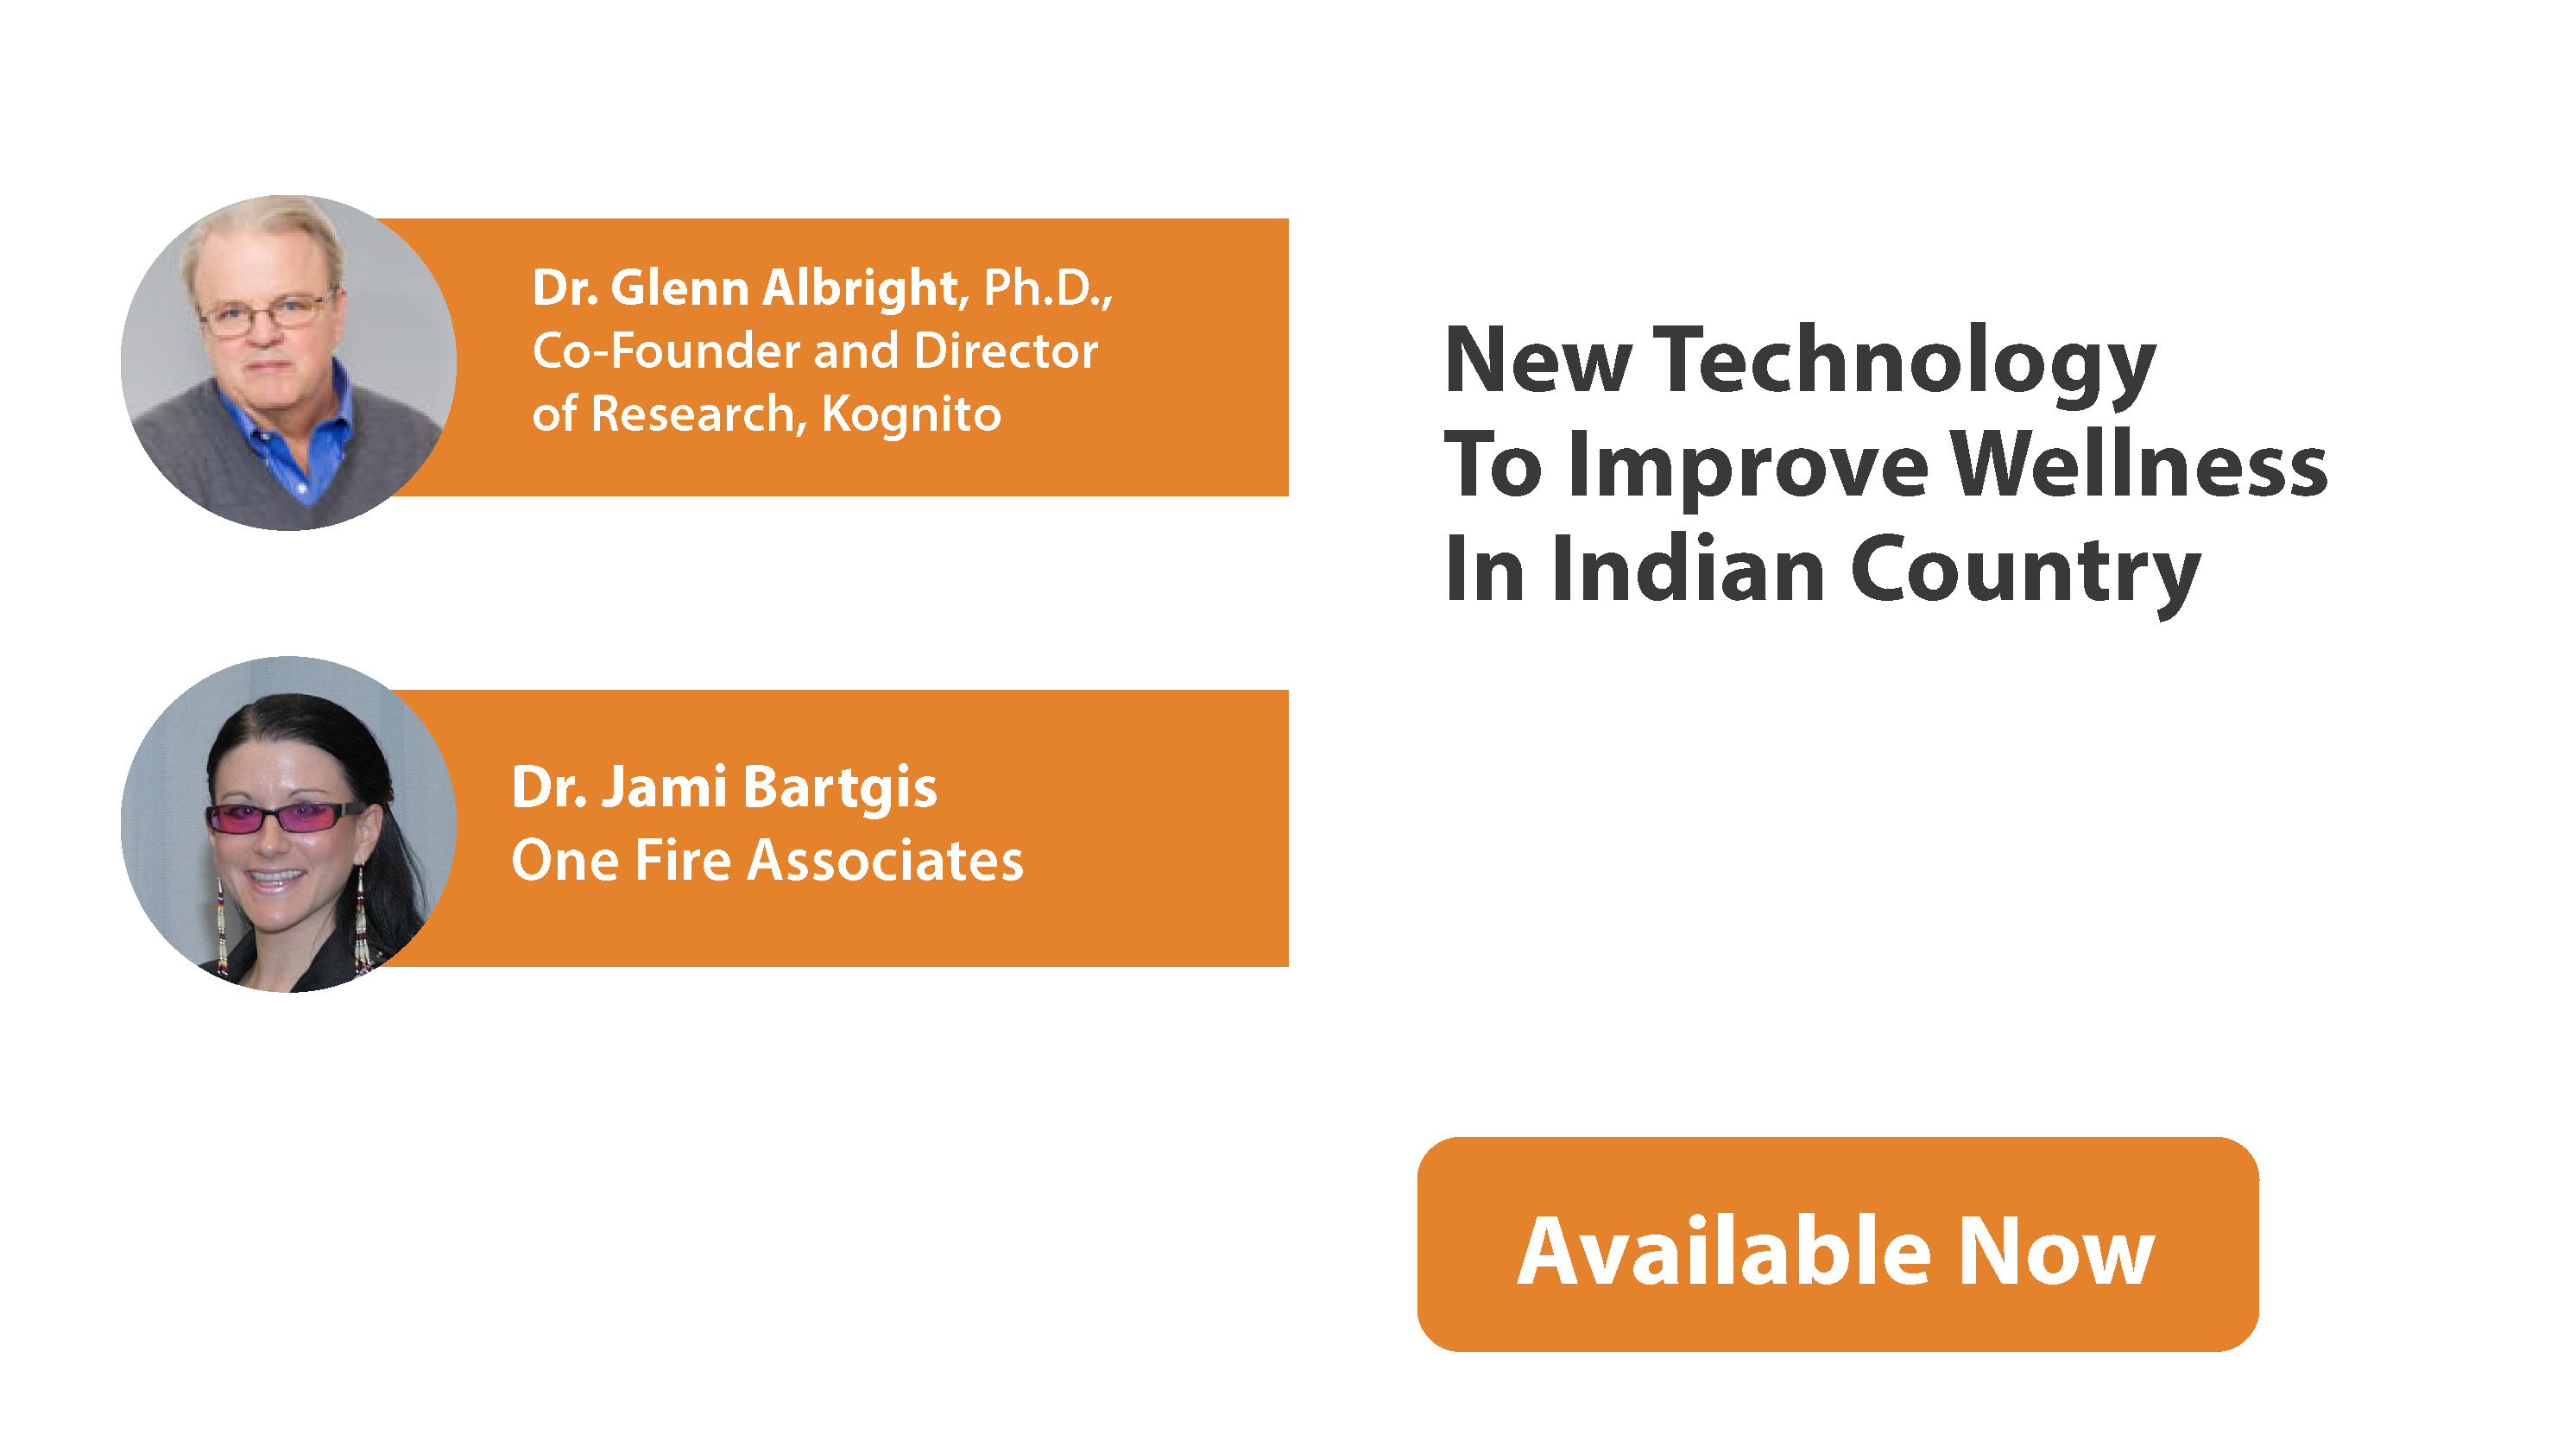 New technology to improve wellness in Indian Country